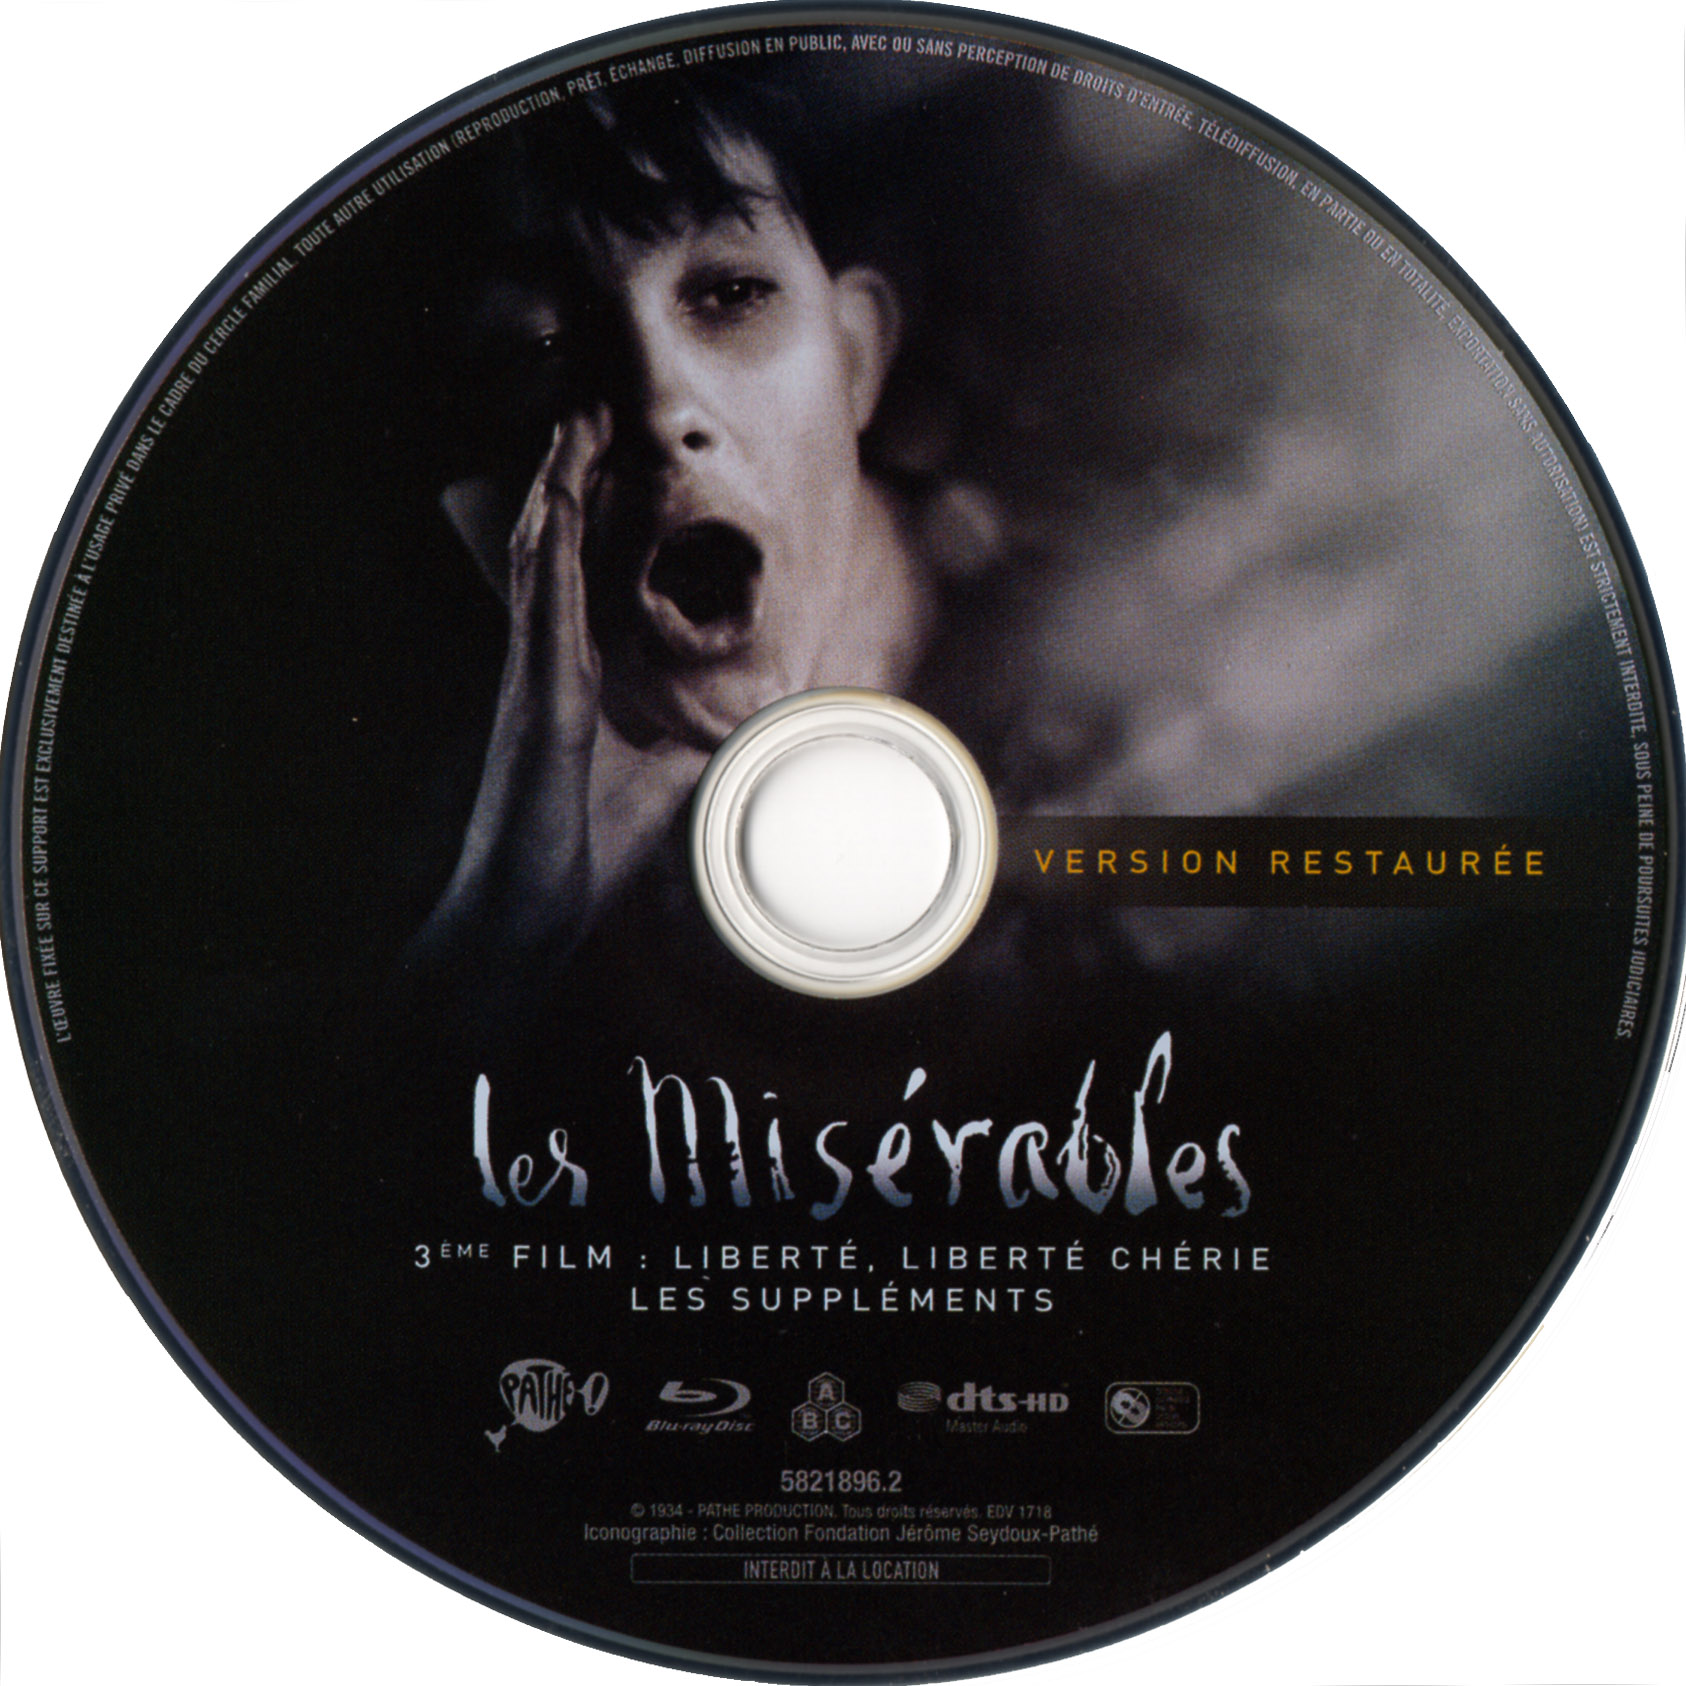 Les misrables (1933) (BLU-RAY) DISC 2